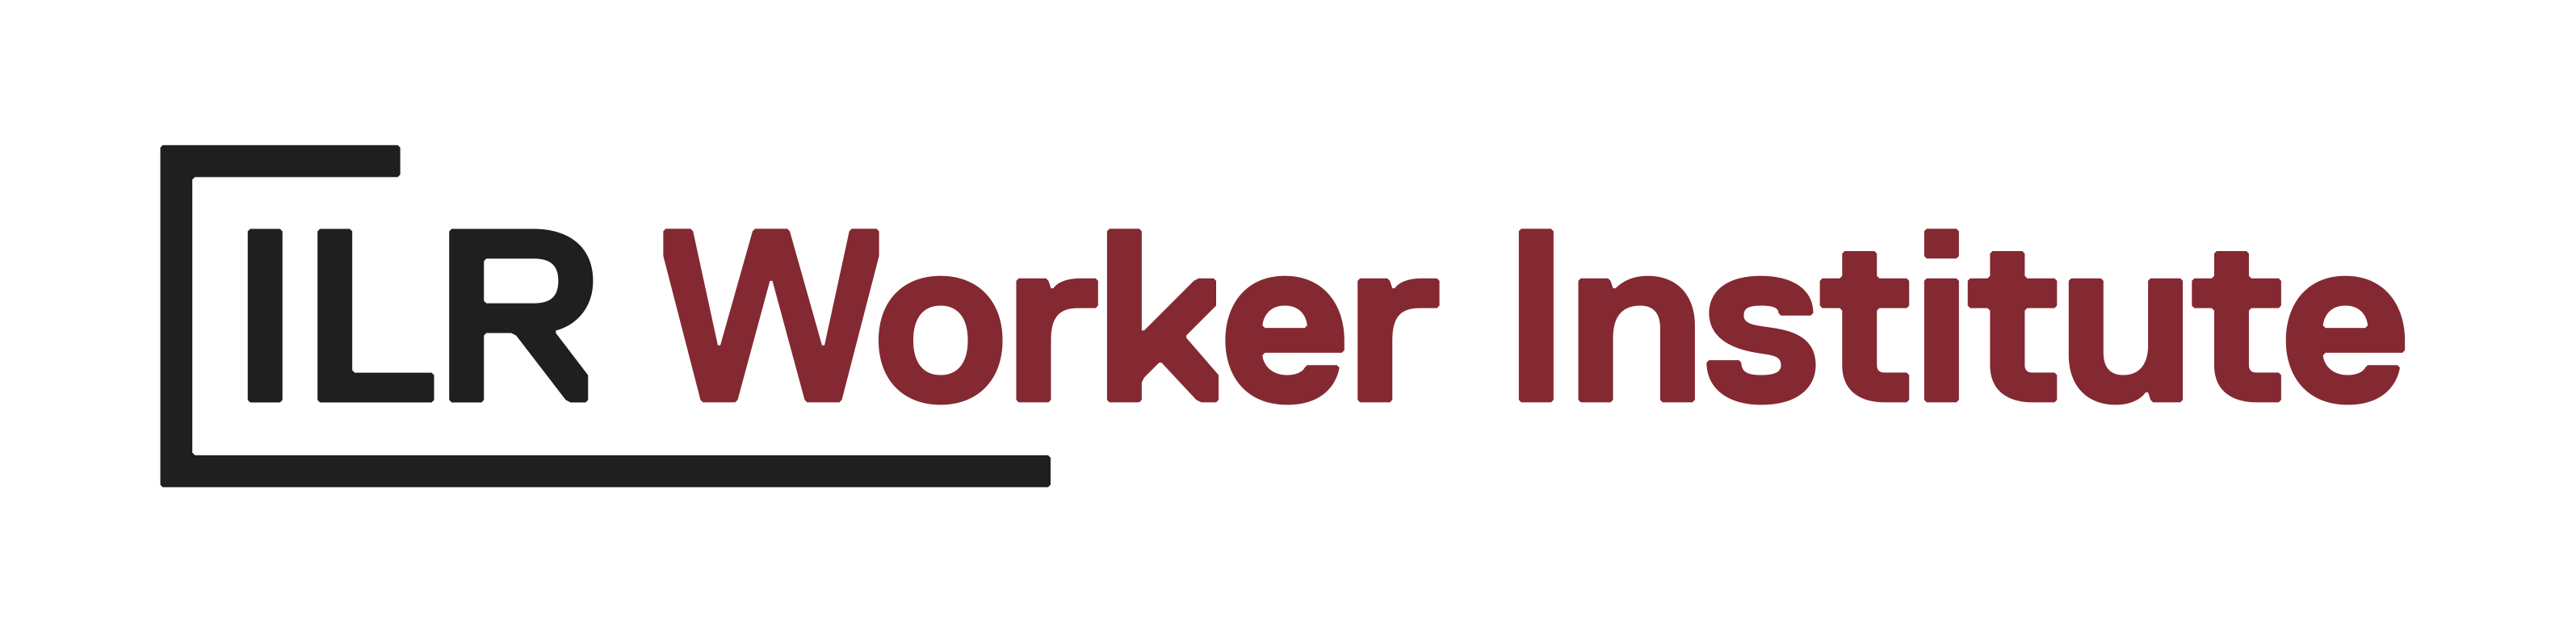 The Worker Institute at Cornell University